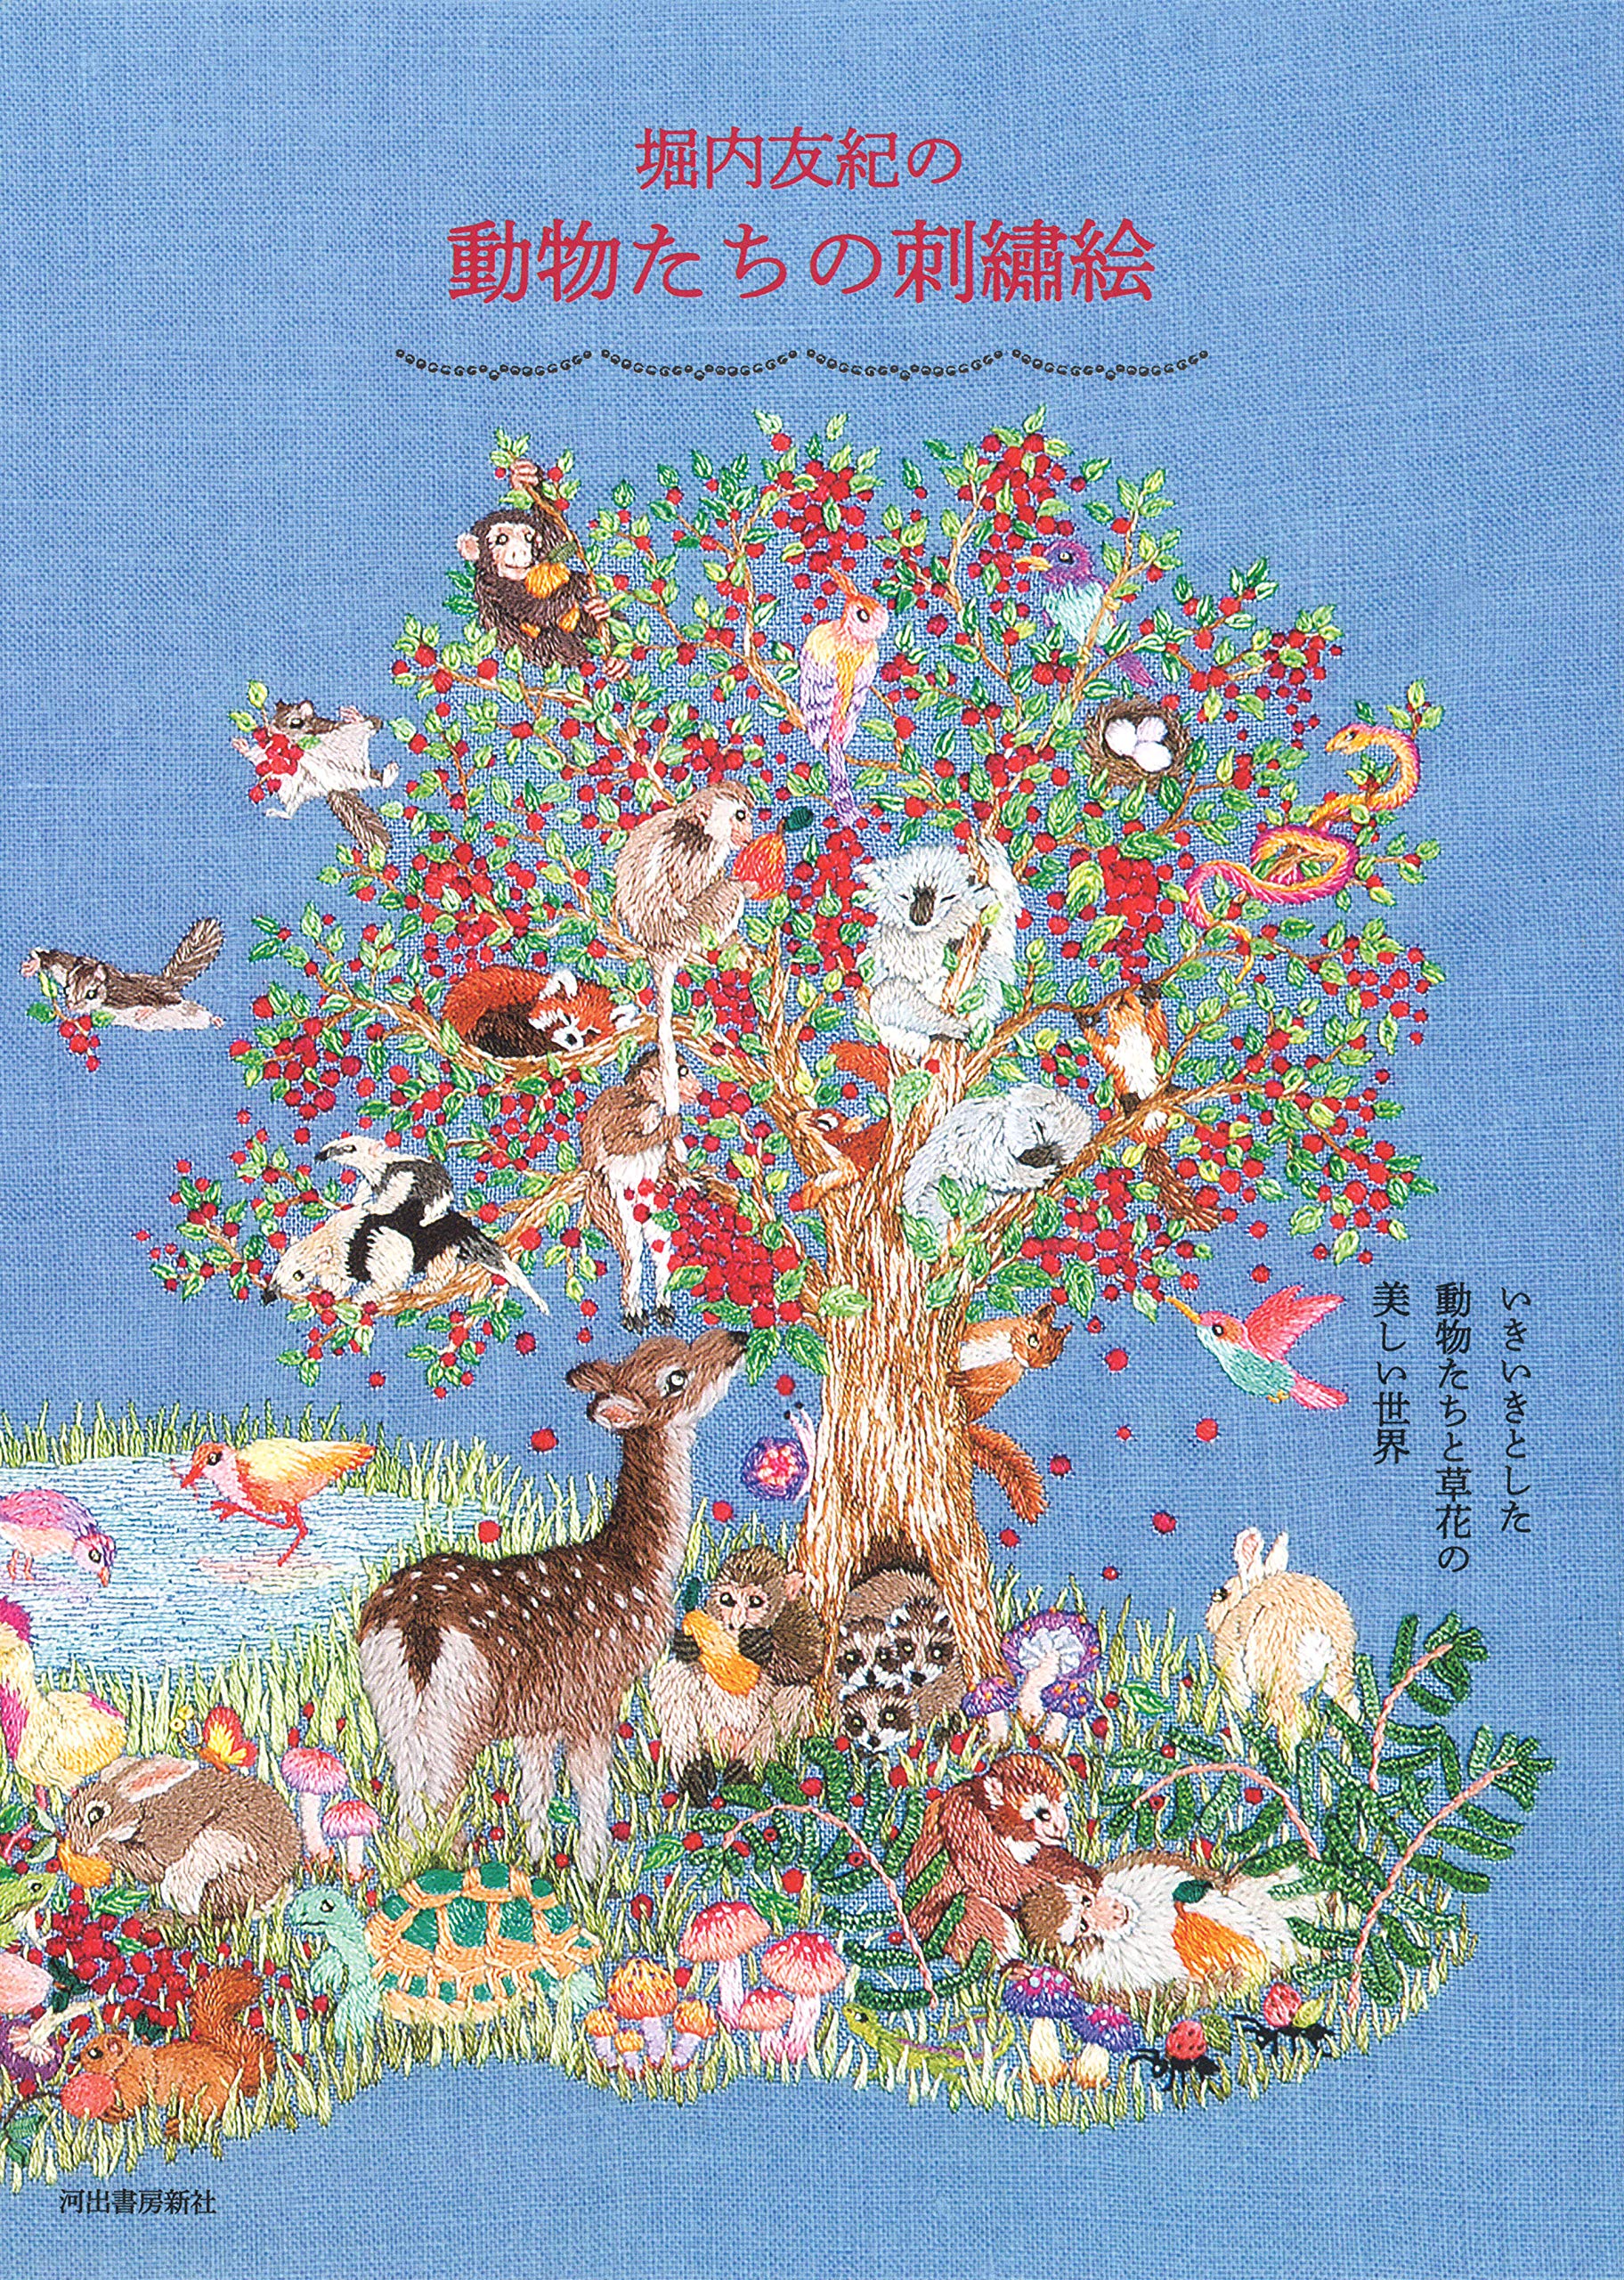 8 best books of animals embroidery [Japanese embroidery